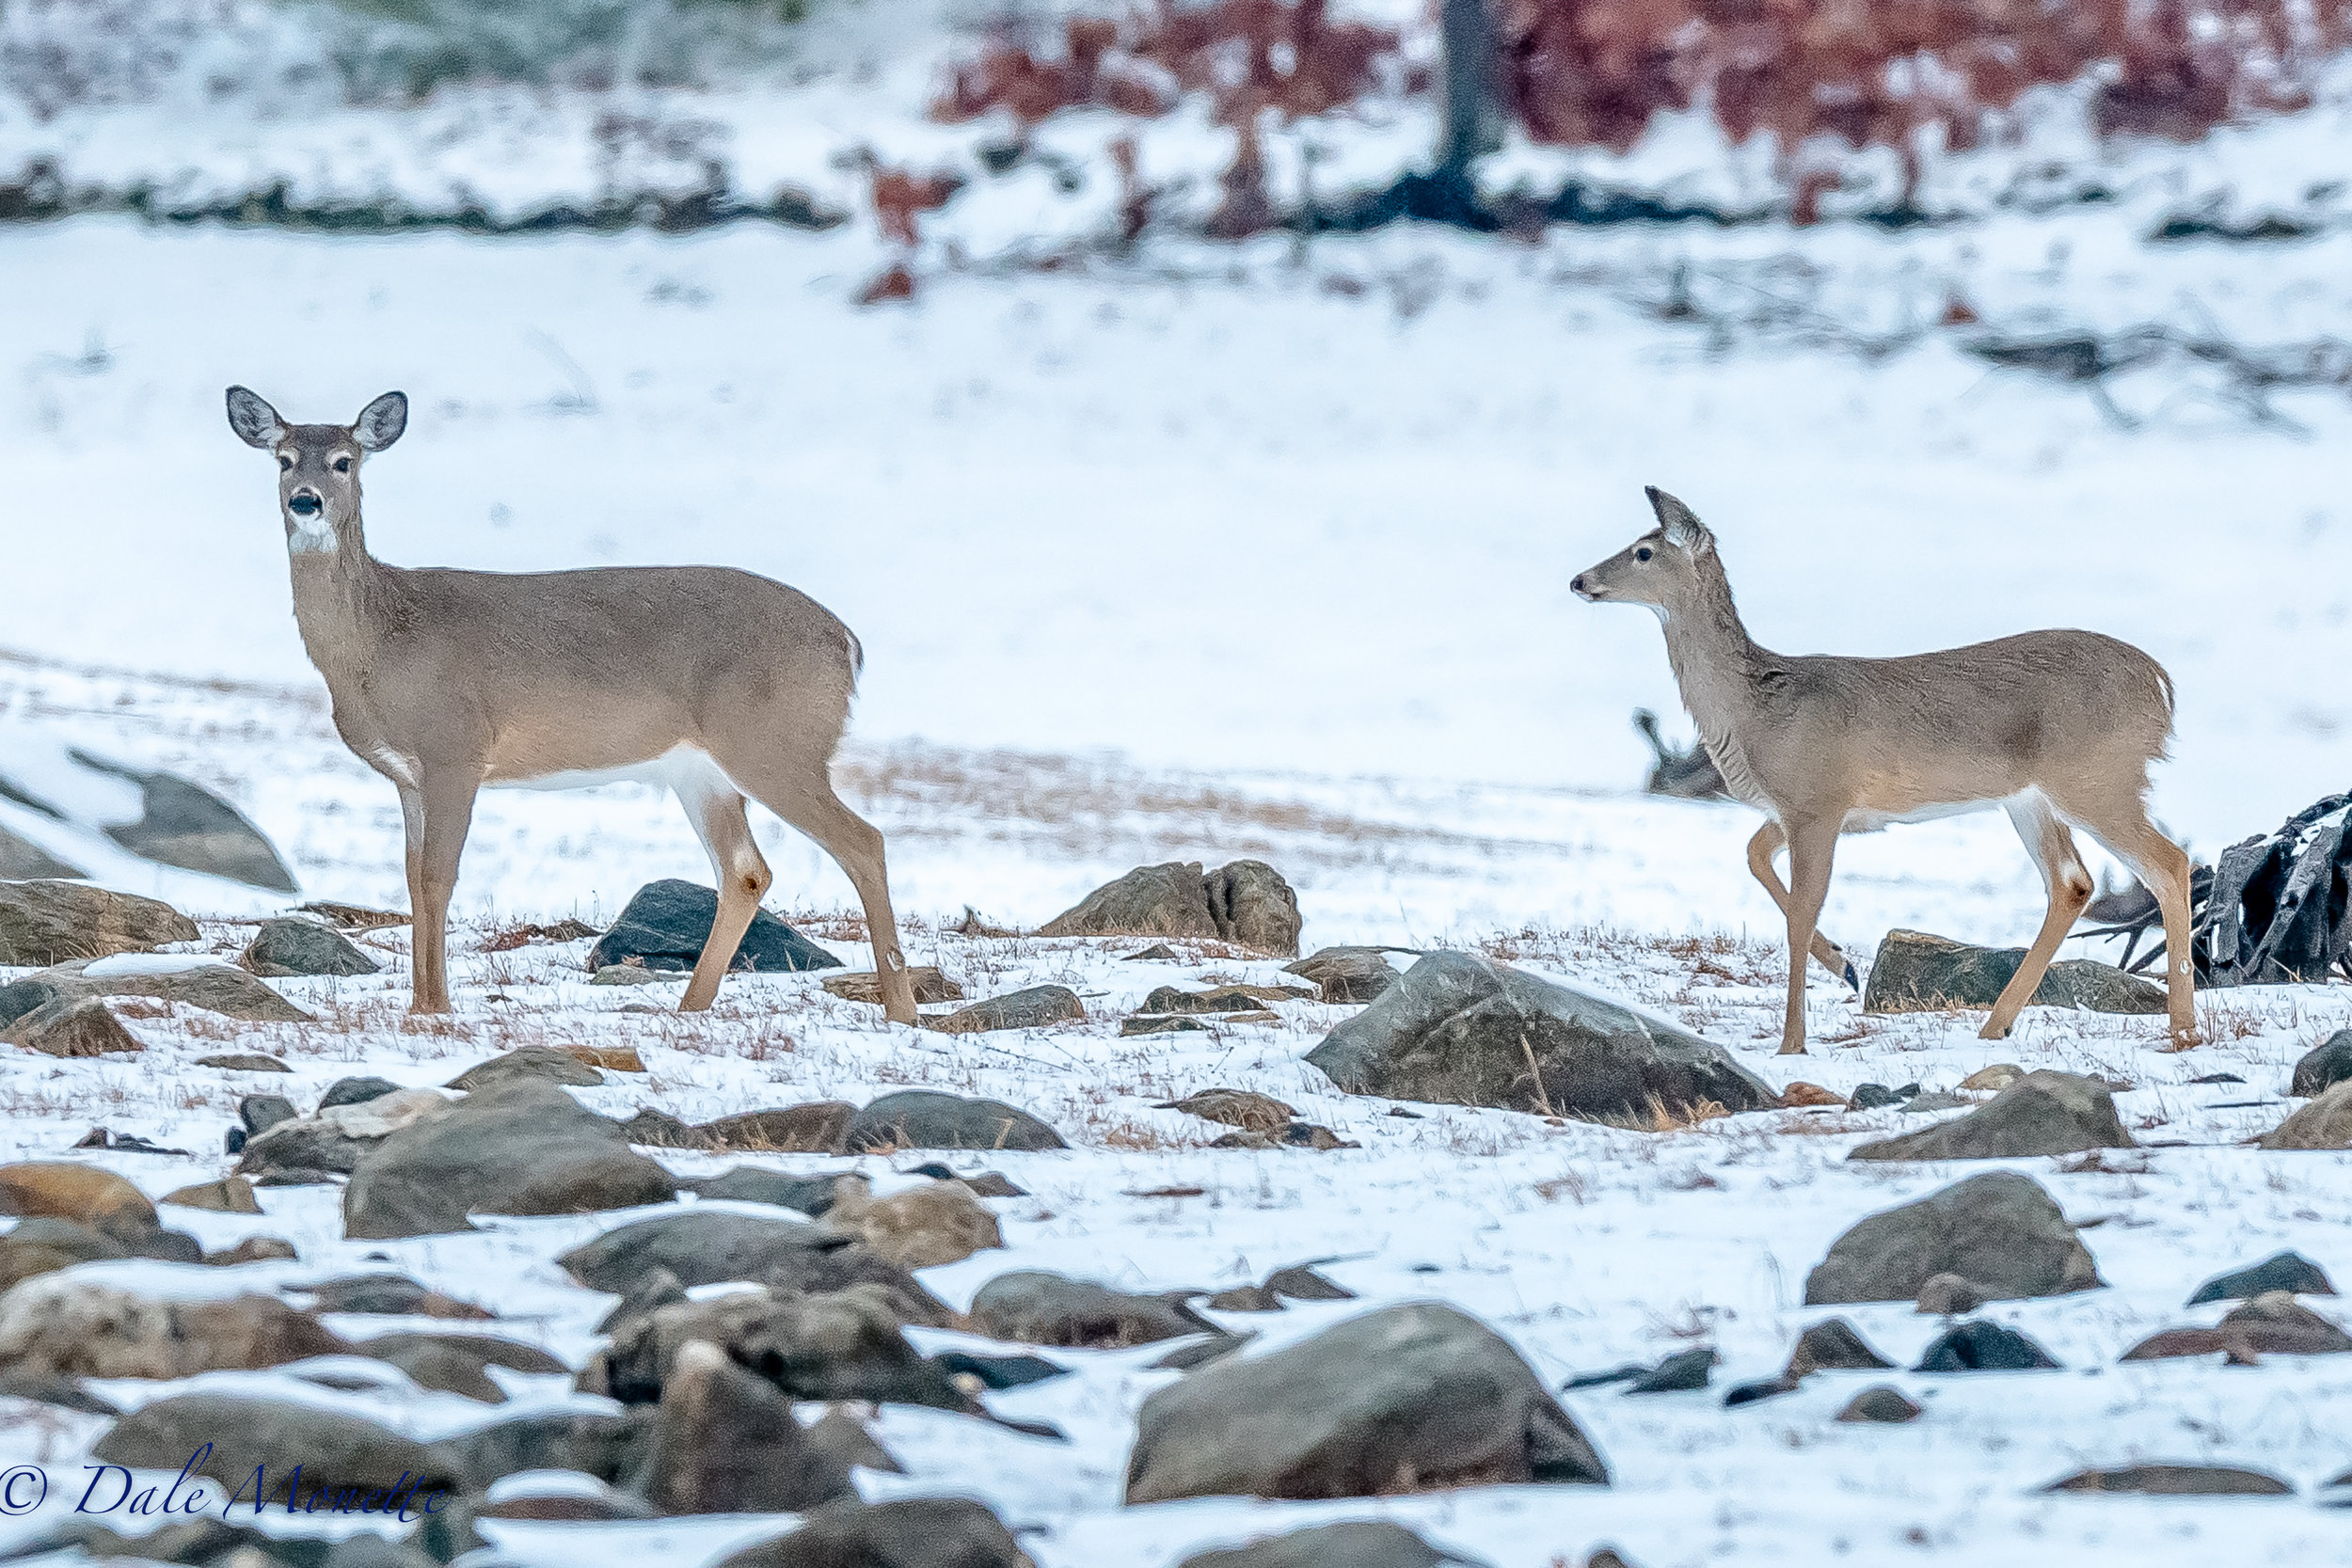   Five white-tailed deer walked out in front of me this morning at 6:30AM on my way into Quabbin. &nbsp;It was a pleasant surprise. &nbsp;I just stood there and snapped a few pictures. They spotted me but didnt leave and just kept moseying along and 